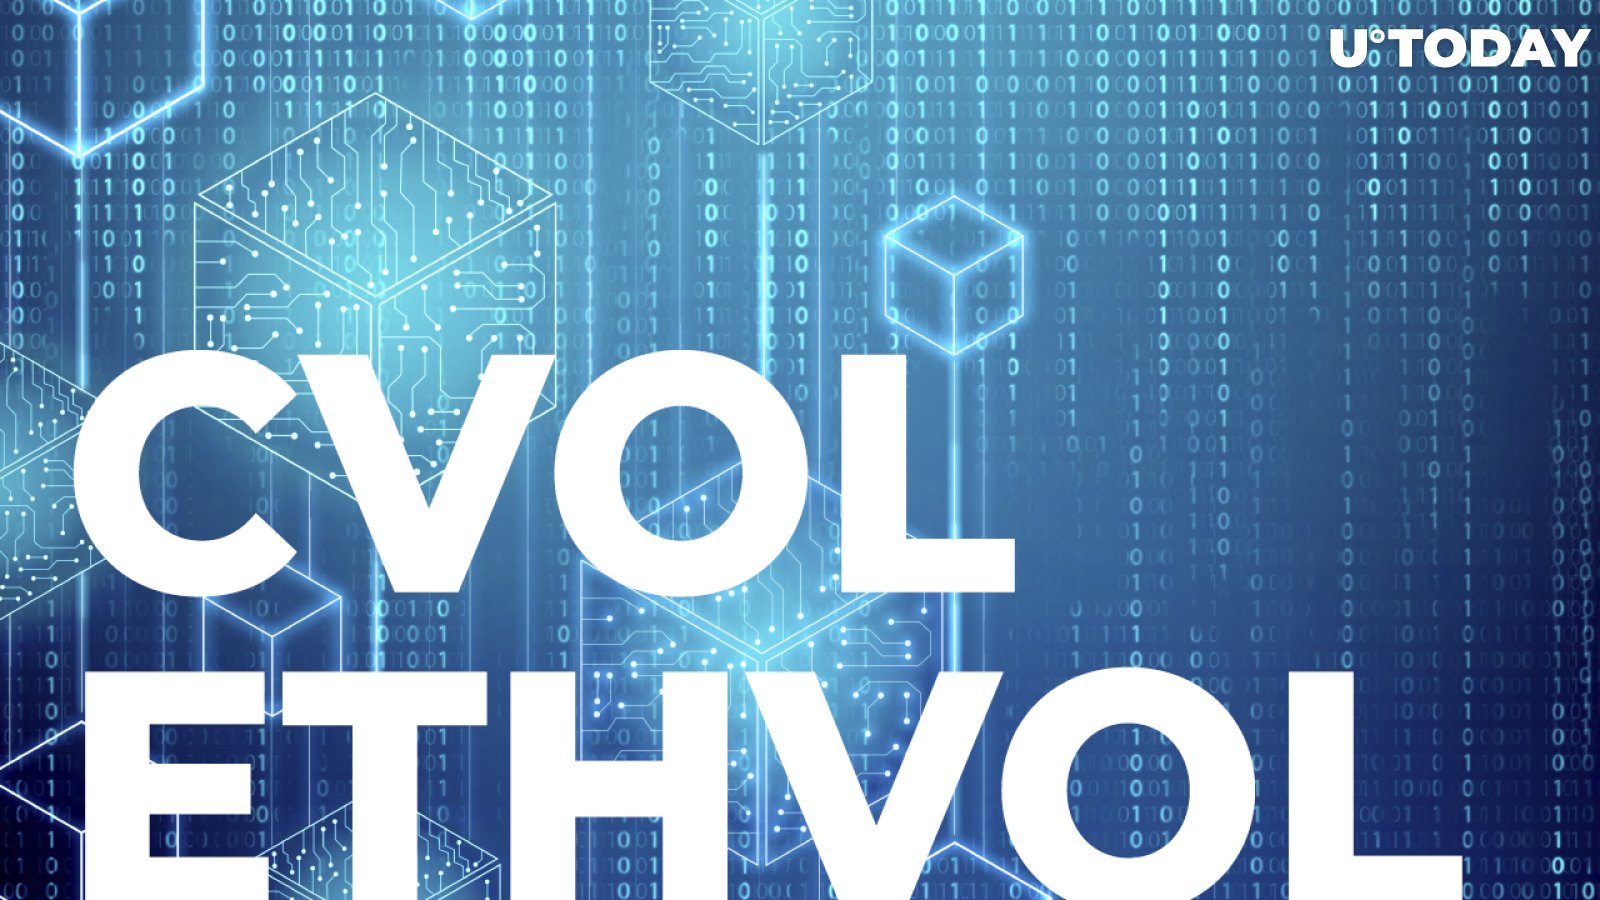 Coti-Backed CVI Releases Two New Volatility Tokens, CVOL and ETHVOL: Details